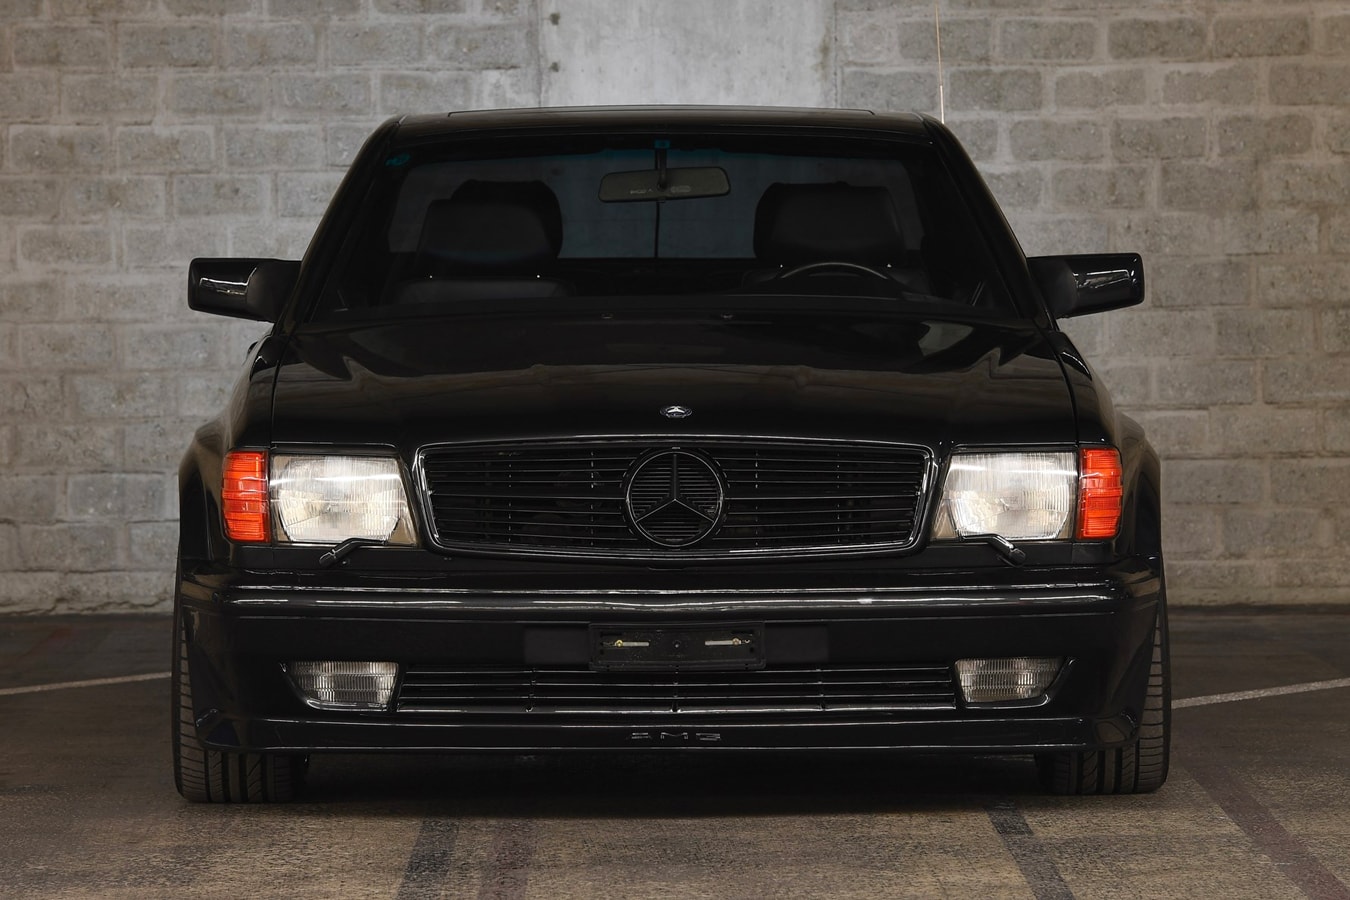 Mercedes Benz 1989 560 SEC AMG Wide Body Auction RM Sotheby's Benz Murdered-Out Blacked Out wide body Rims Engine 